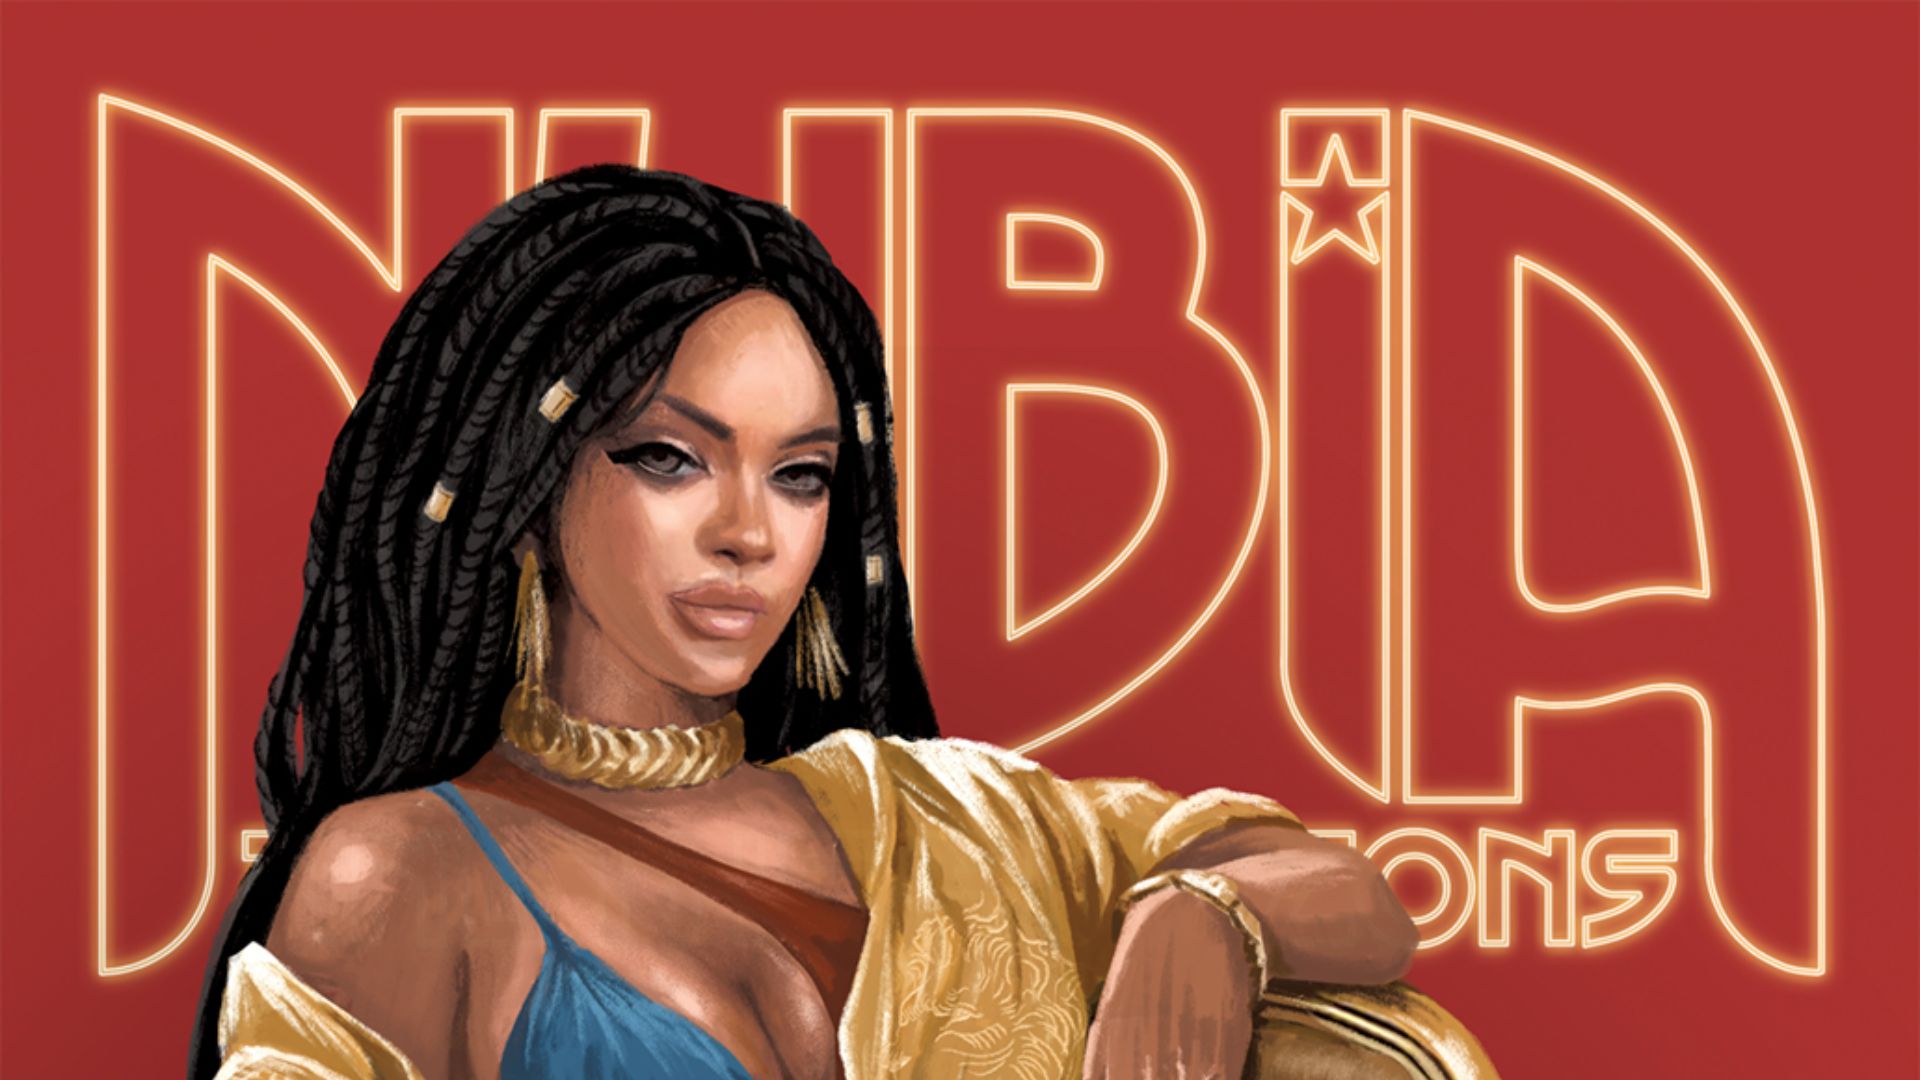 Beyond Wonder Woman: How Nubia Became Queen of the s